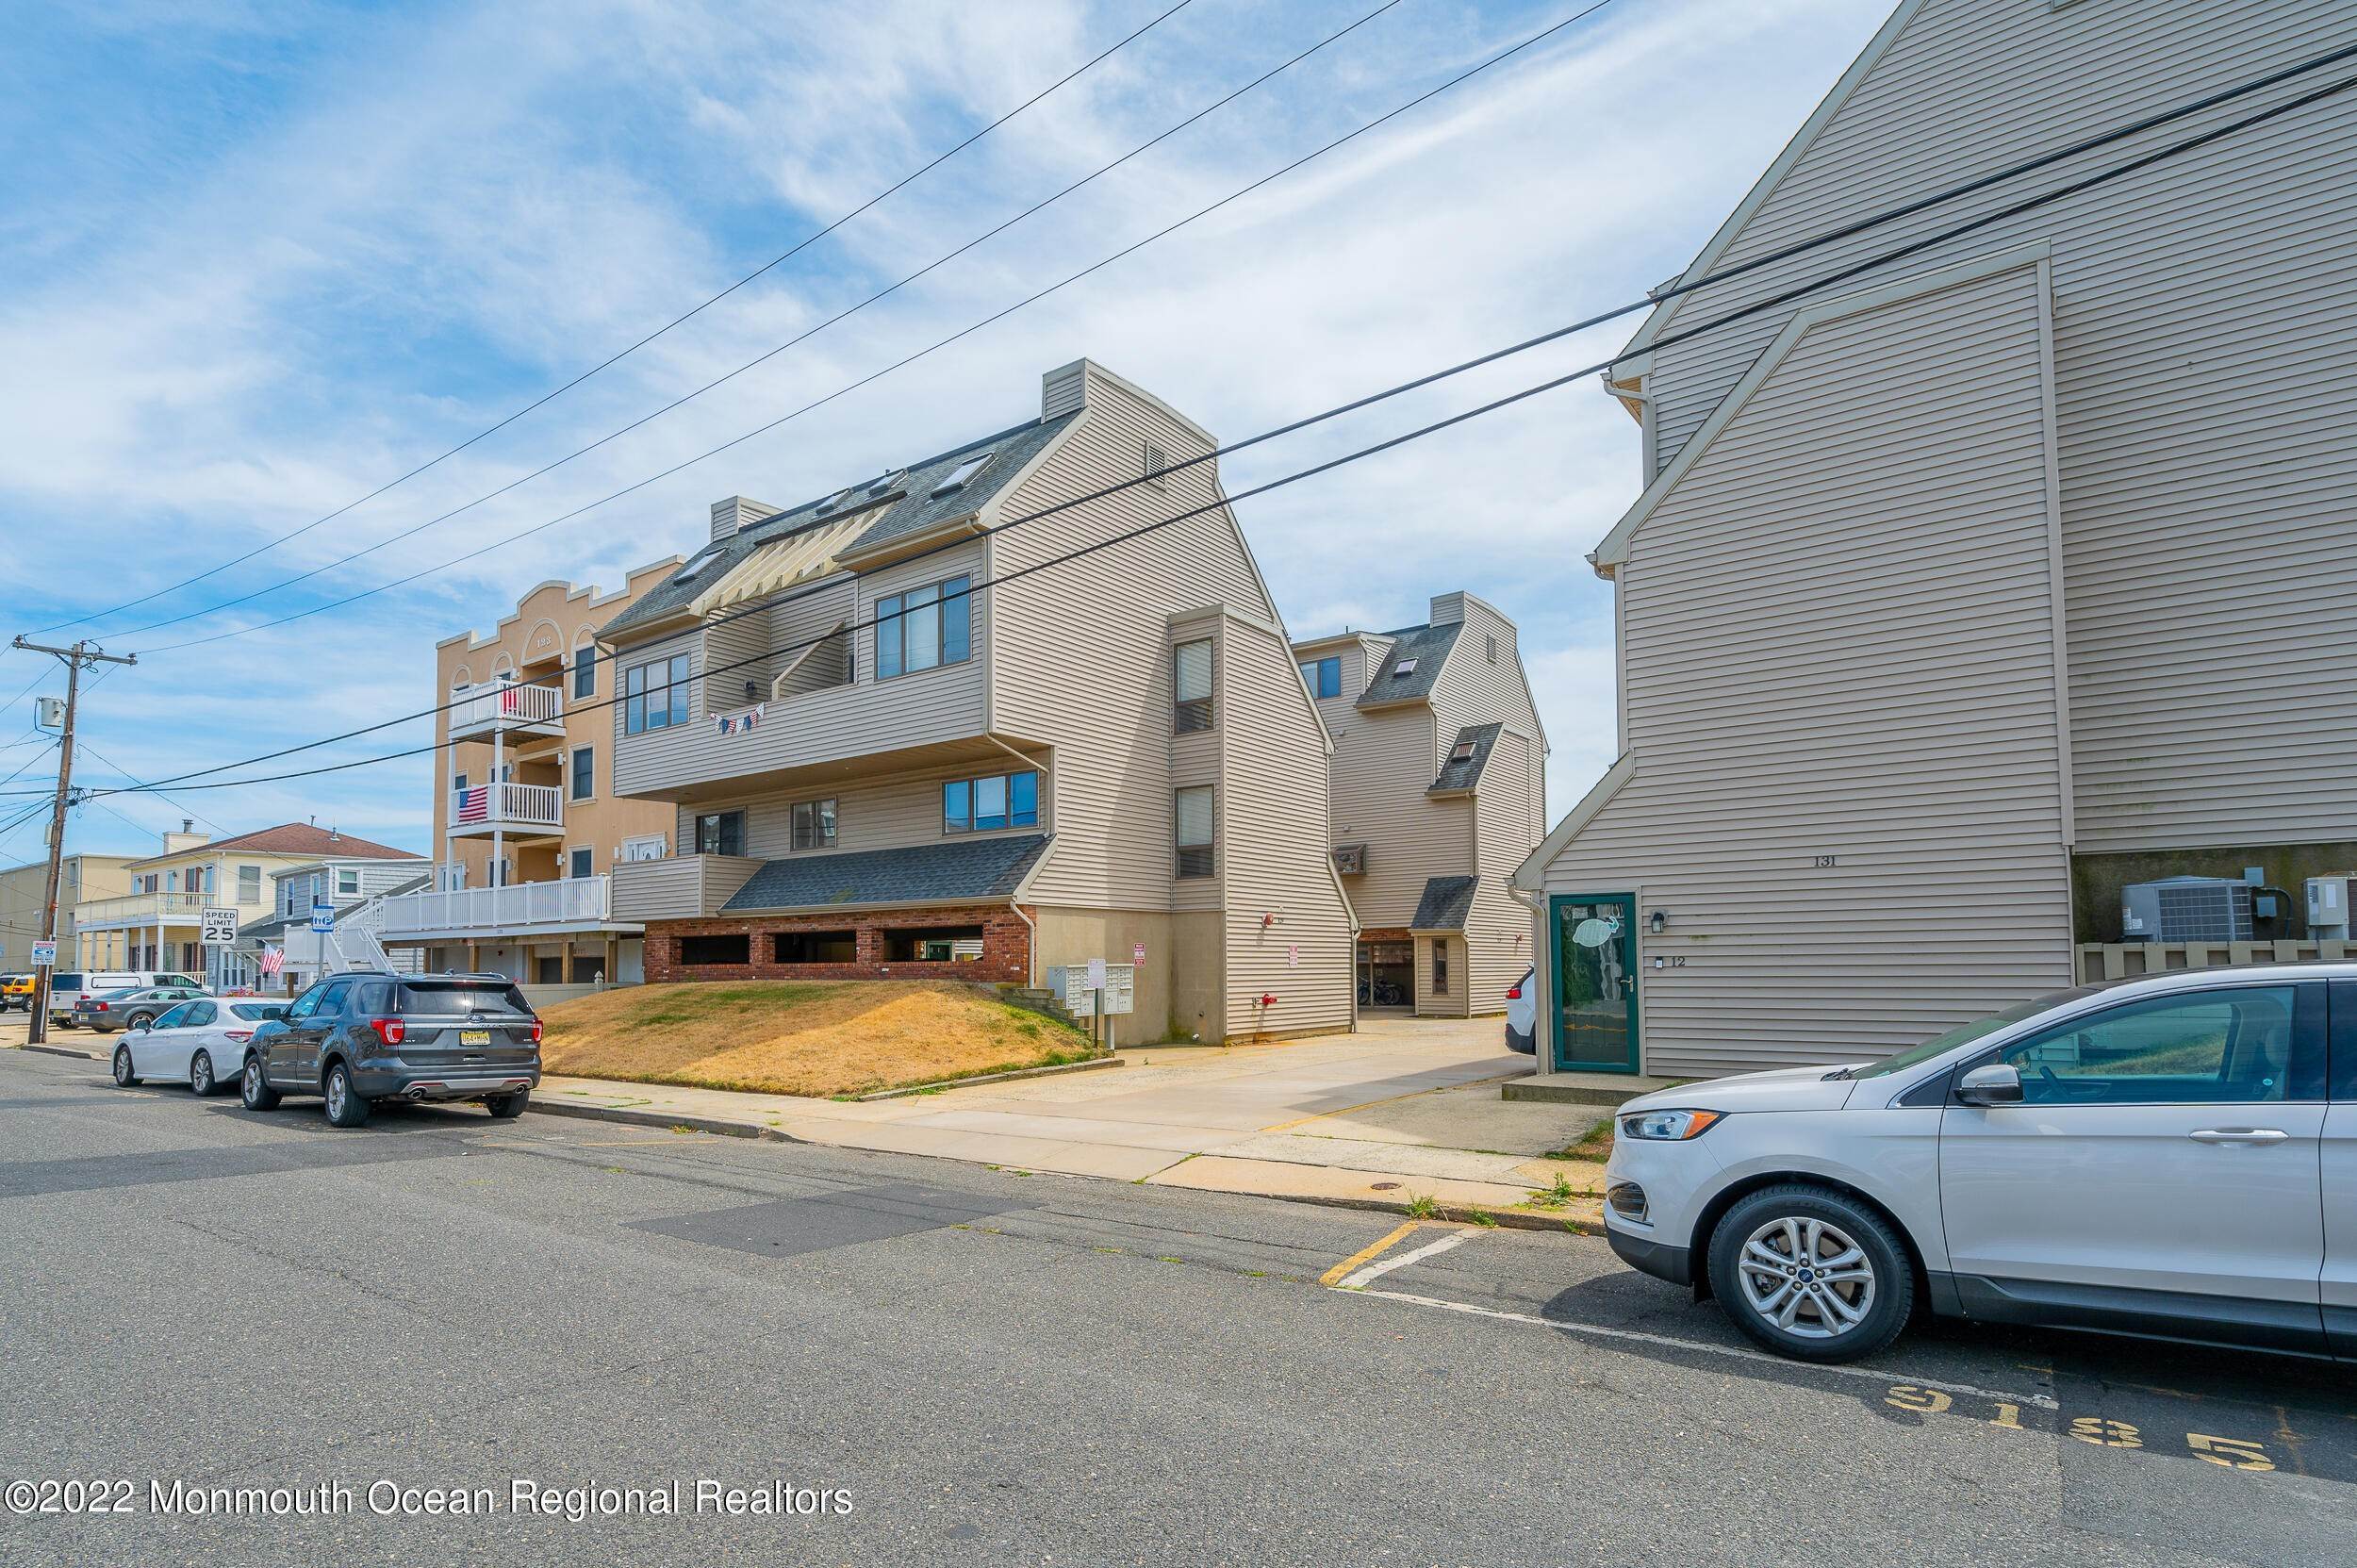 Single Family Homes for Sale at 127 - 129 Hiering Avenue C14 Seaside Heights, New Jersey 08751 United States